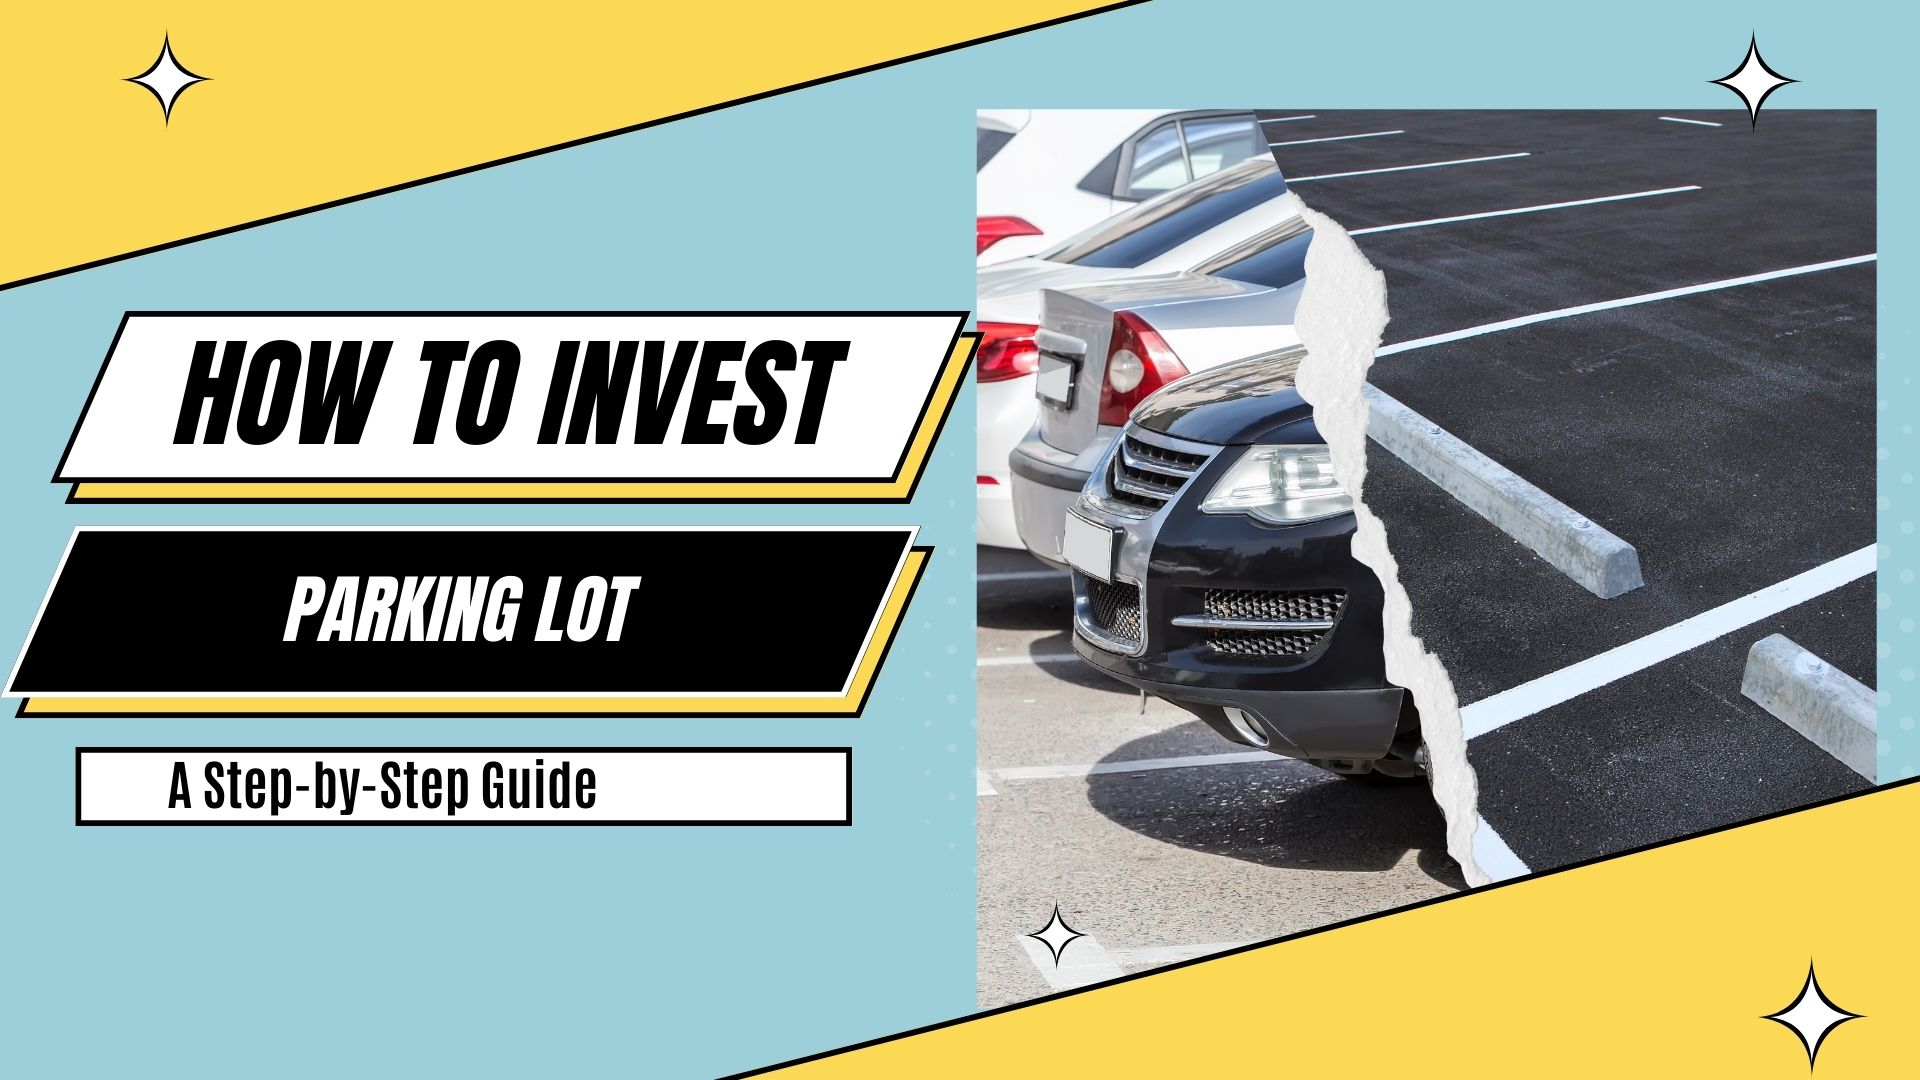 How to Invest in a Parking Lot